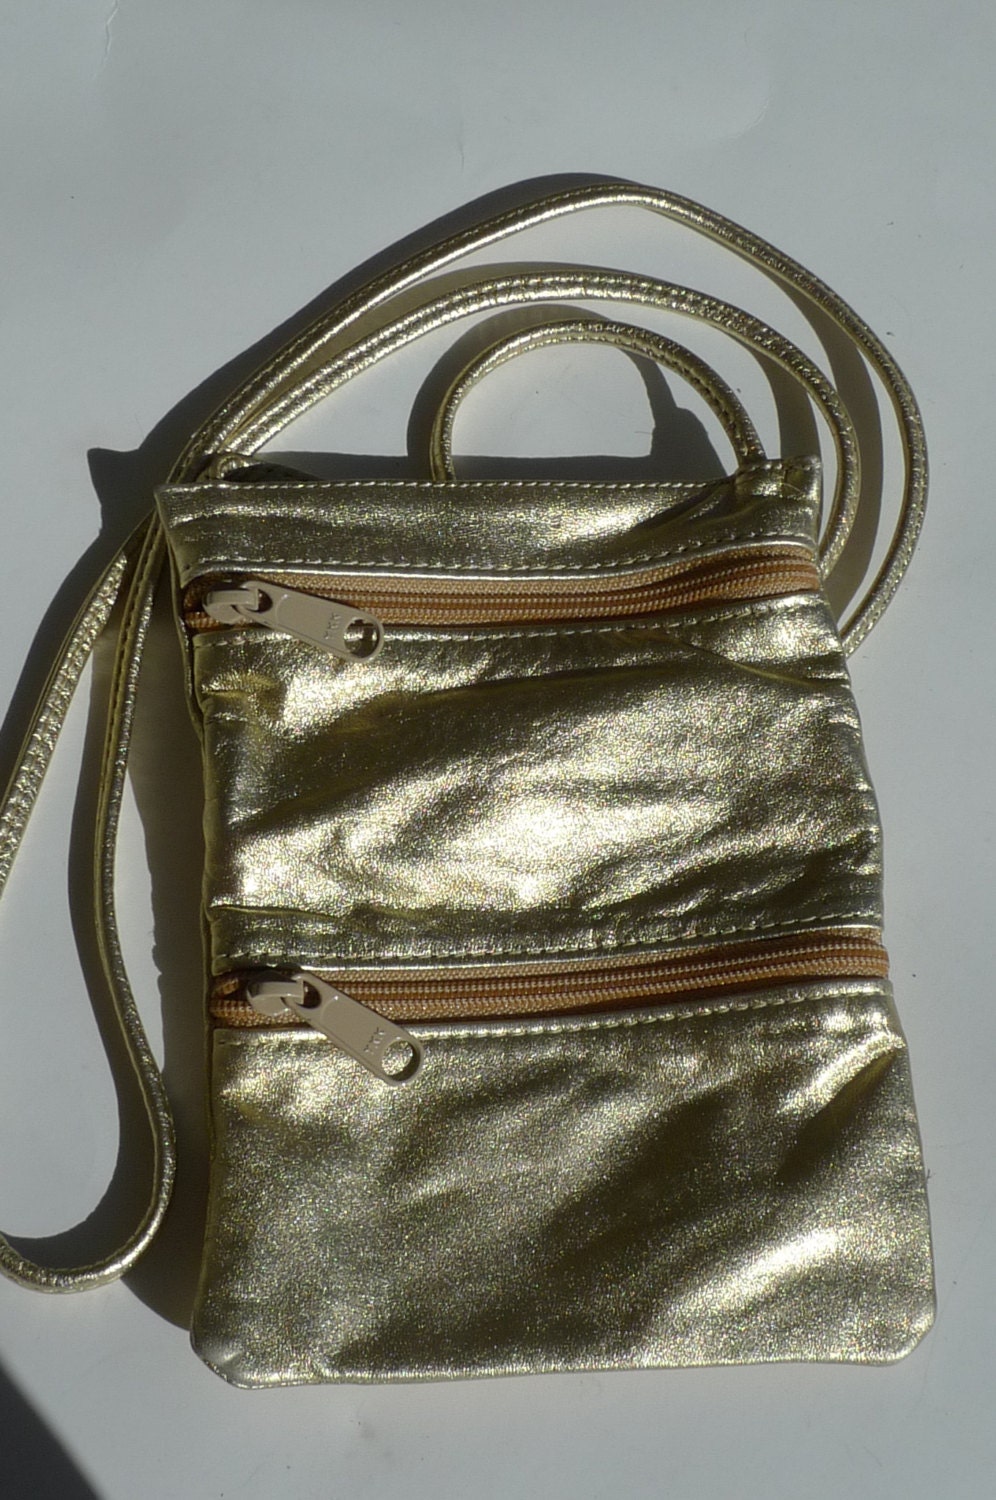 stay gold leather bag made in the usa 1970s disco by cozystudio